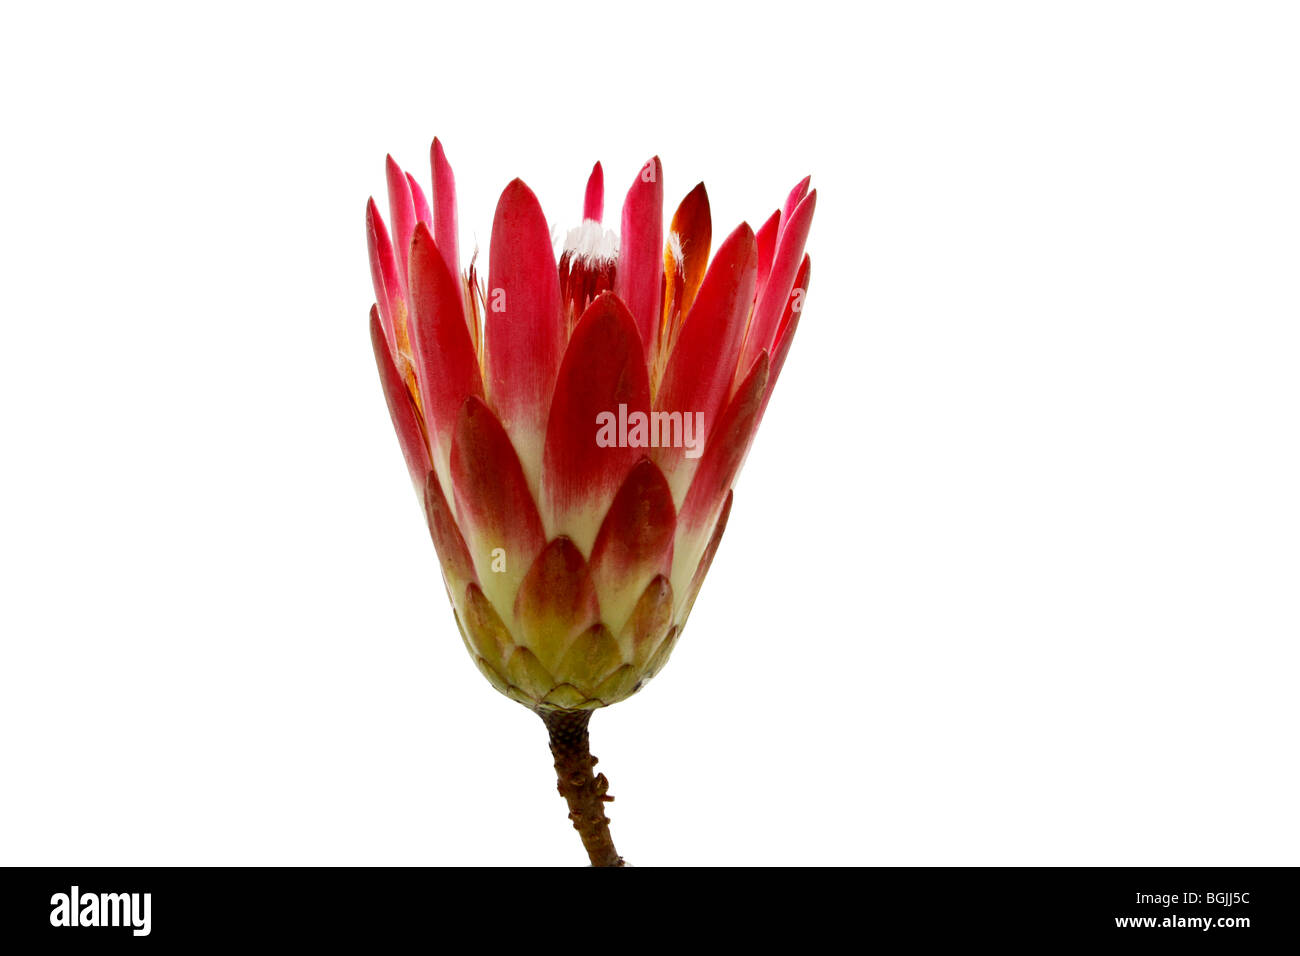 Protea flower isolated on a white background Stock Photo